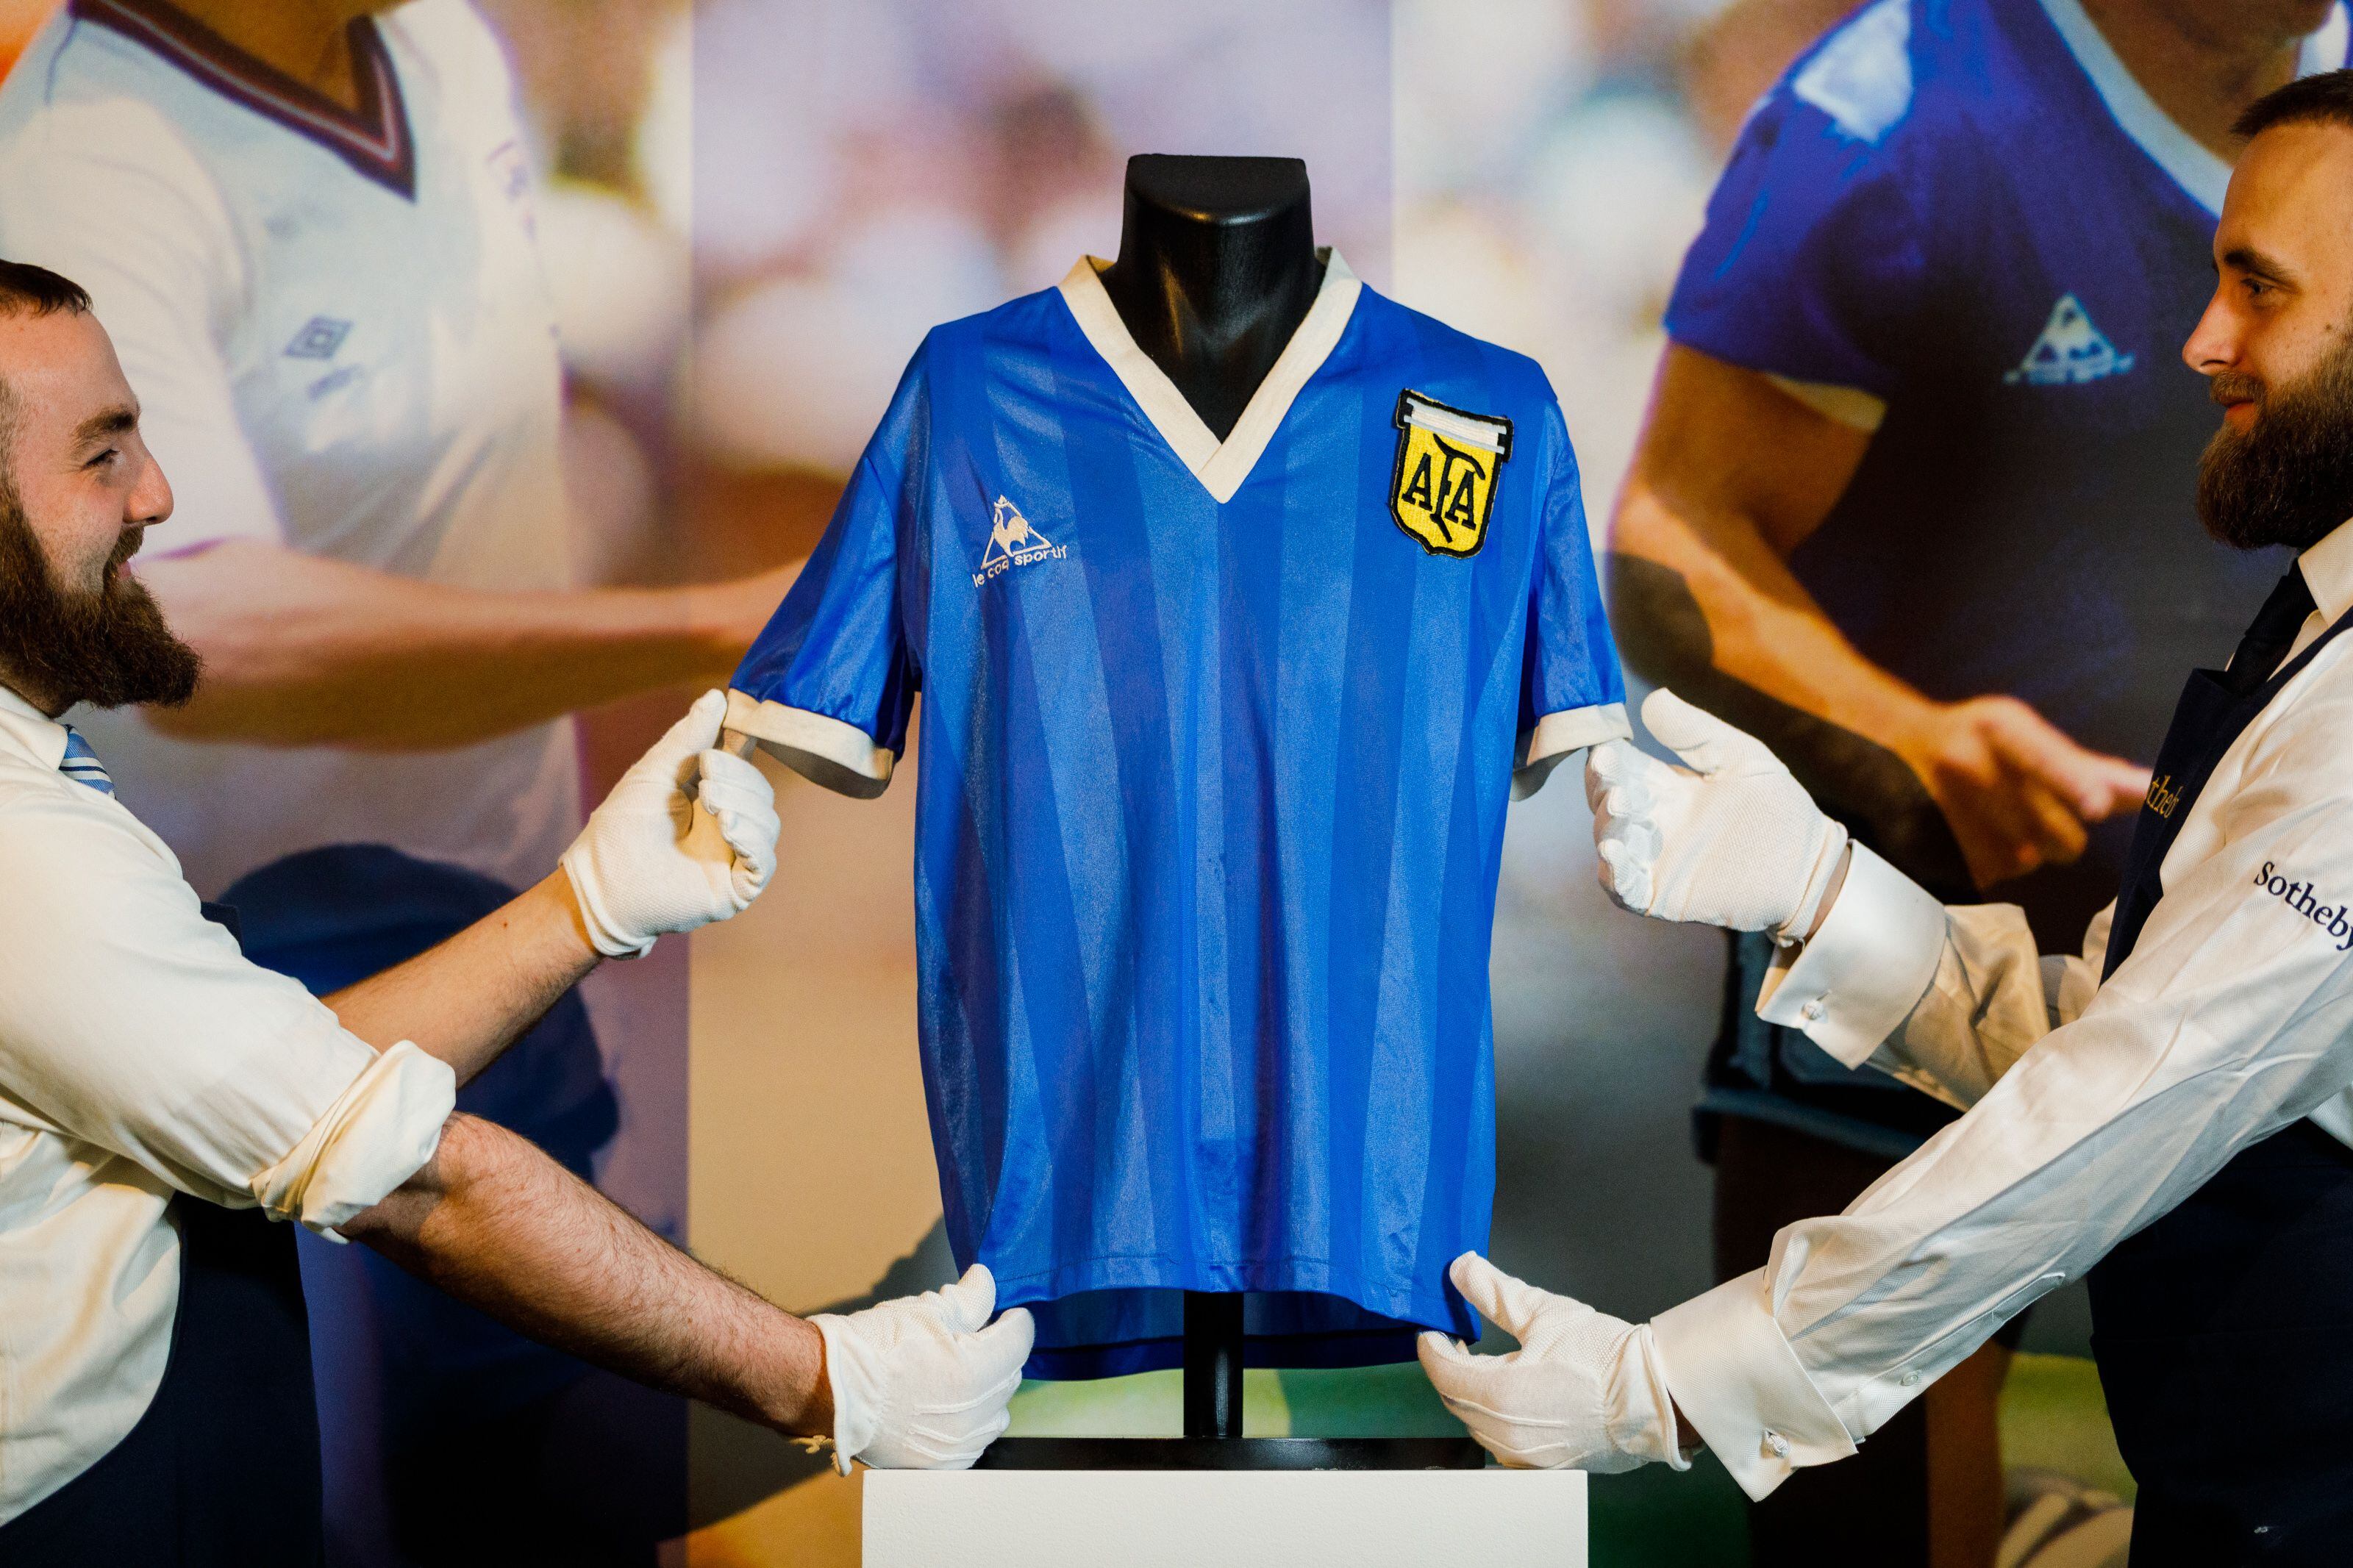 GOAL on X: Diego Maradona's 'Hand of God' shirt has smashed the record for  the most expensive football jersey in history, after an early bid of £4  million at auction 🇦🇷 The